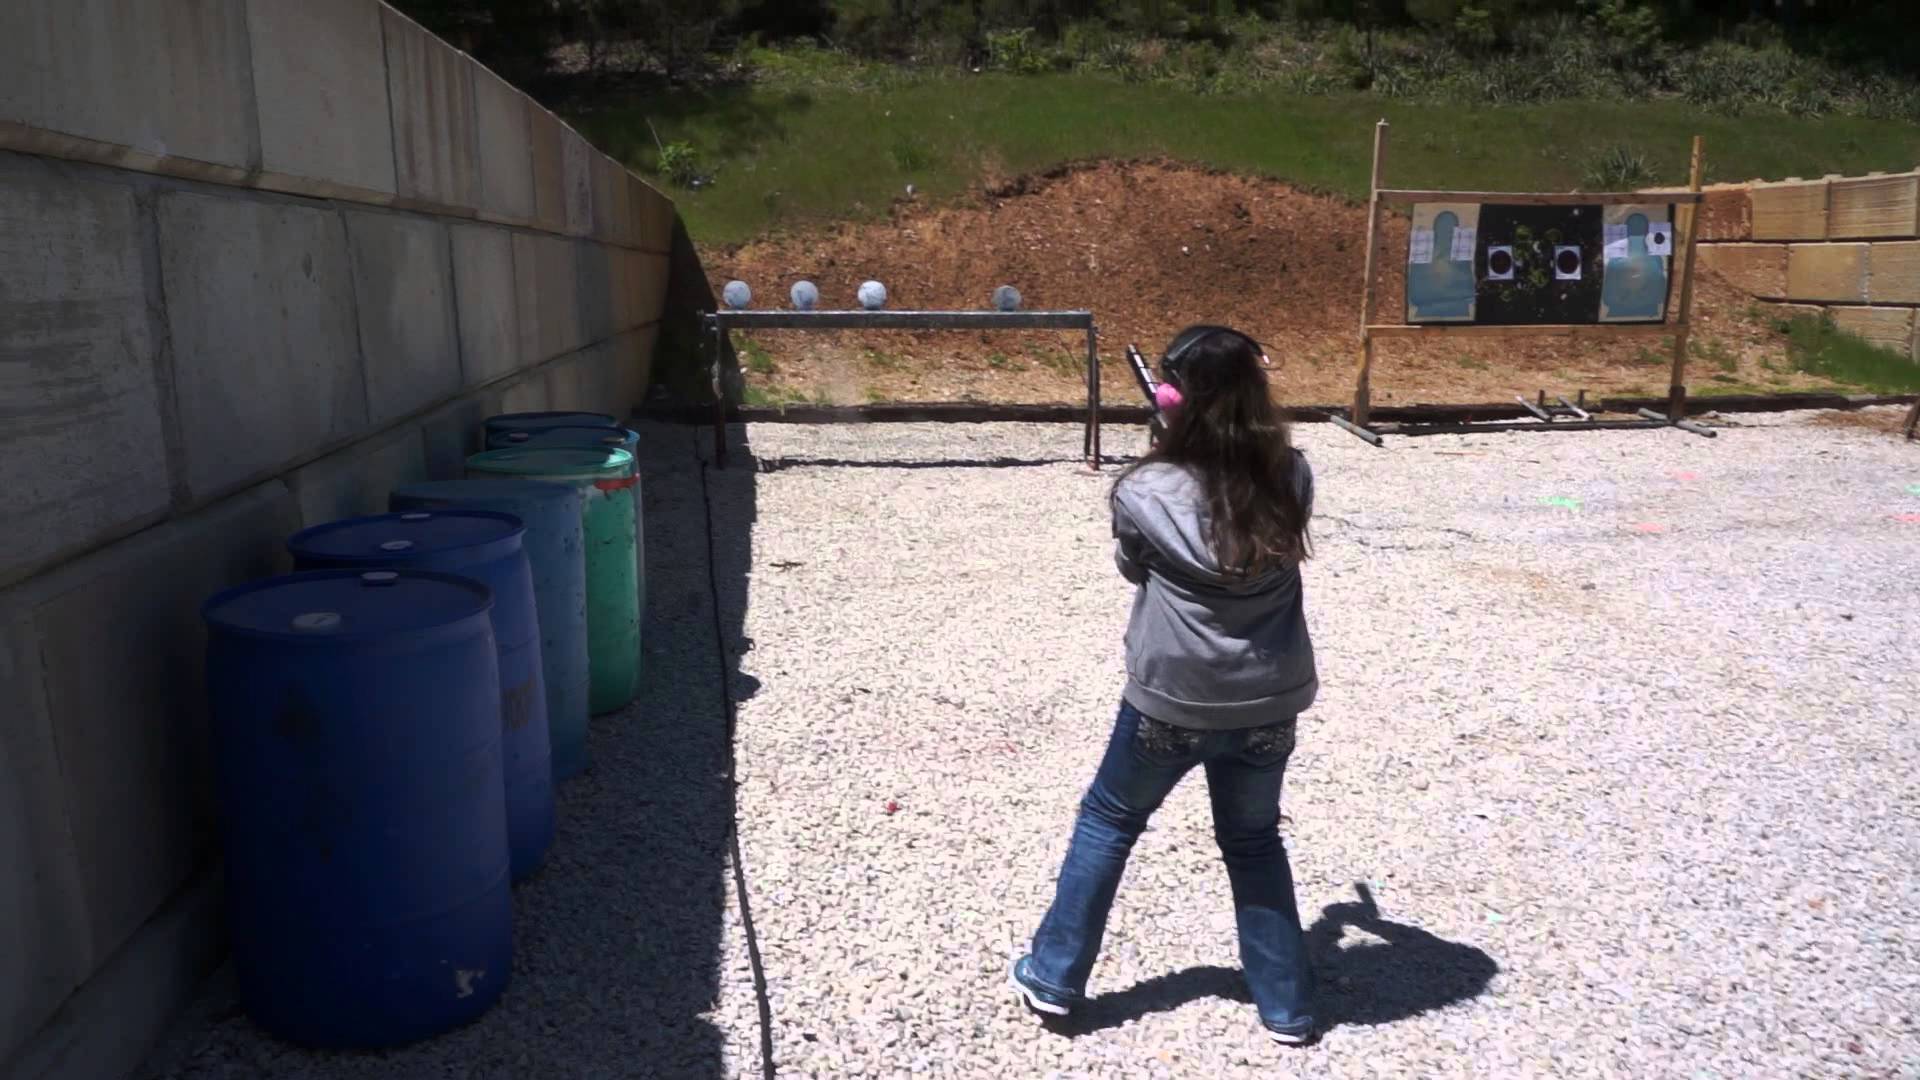 12 YR OLD GIRL SHOOTS A SMITH AND WESSON 629 STEALTH HUNTER